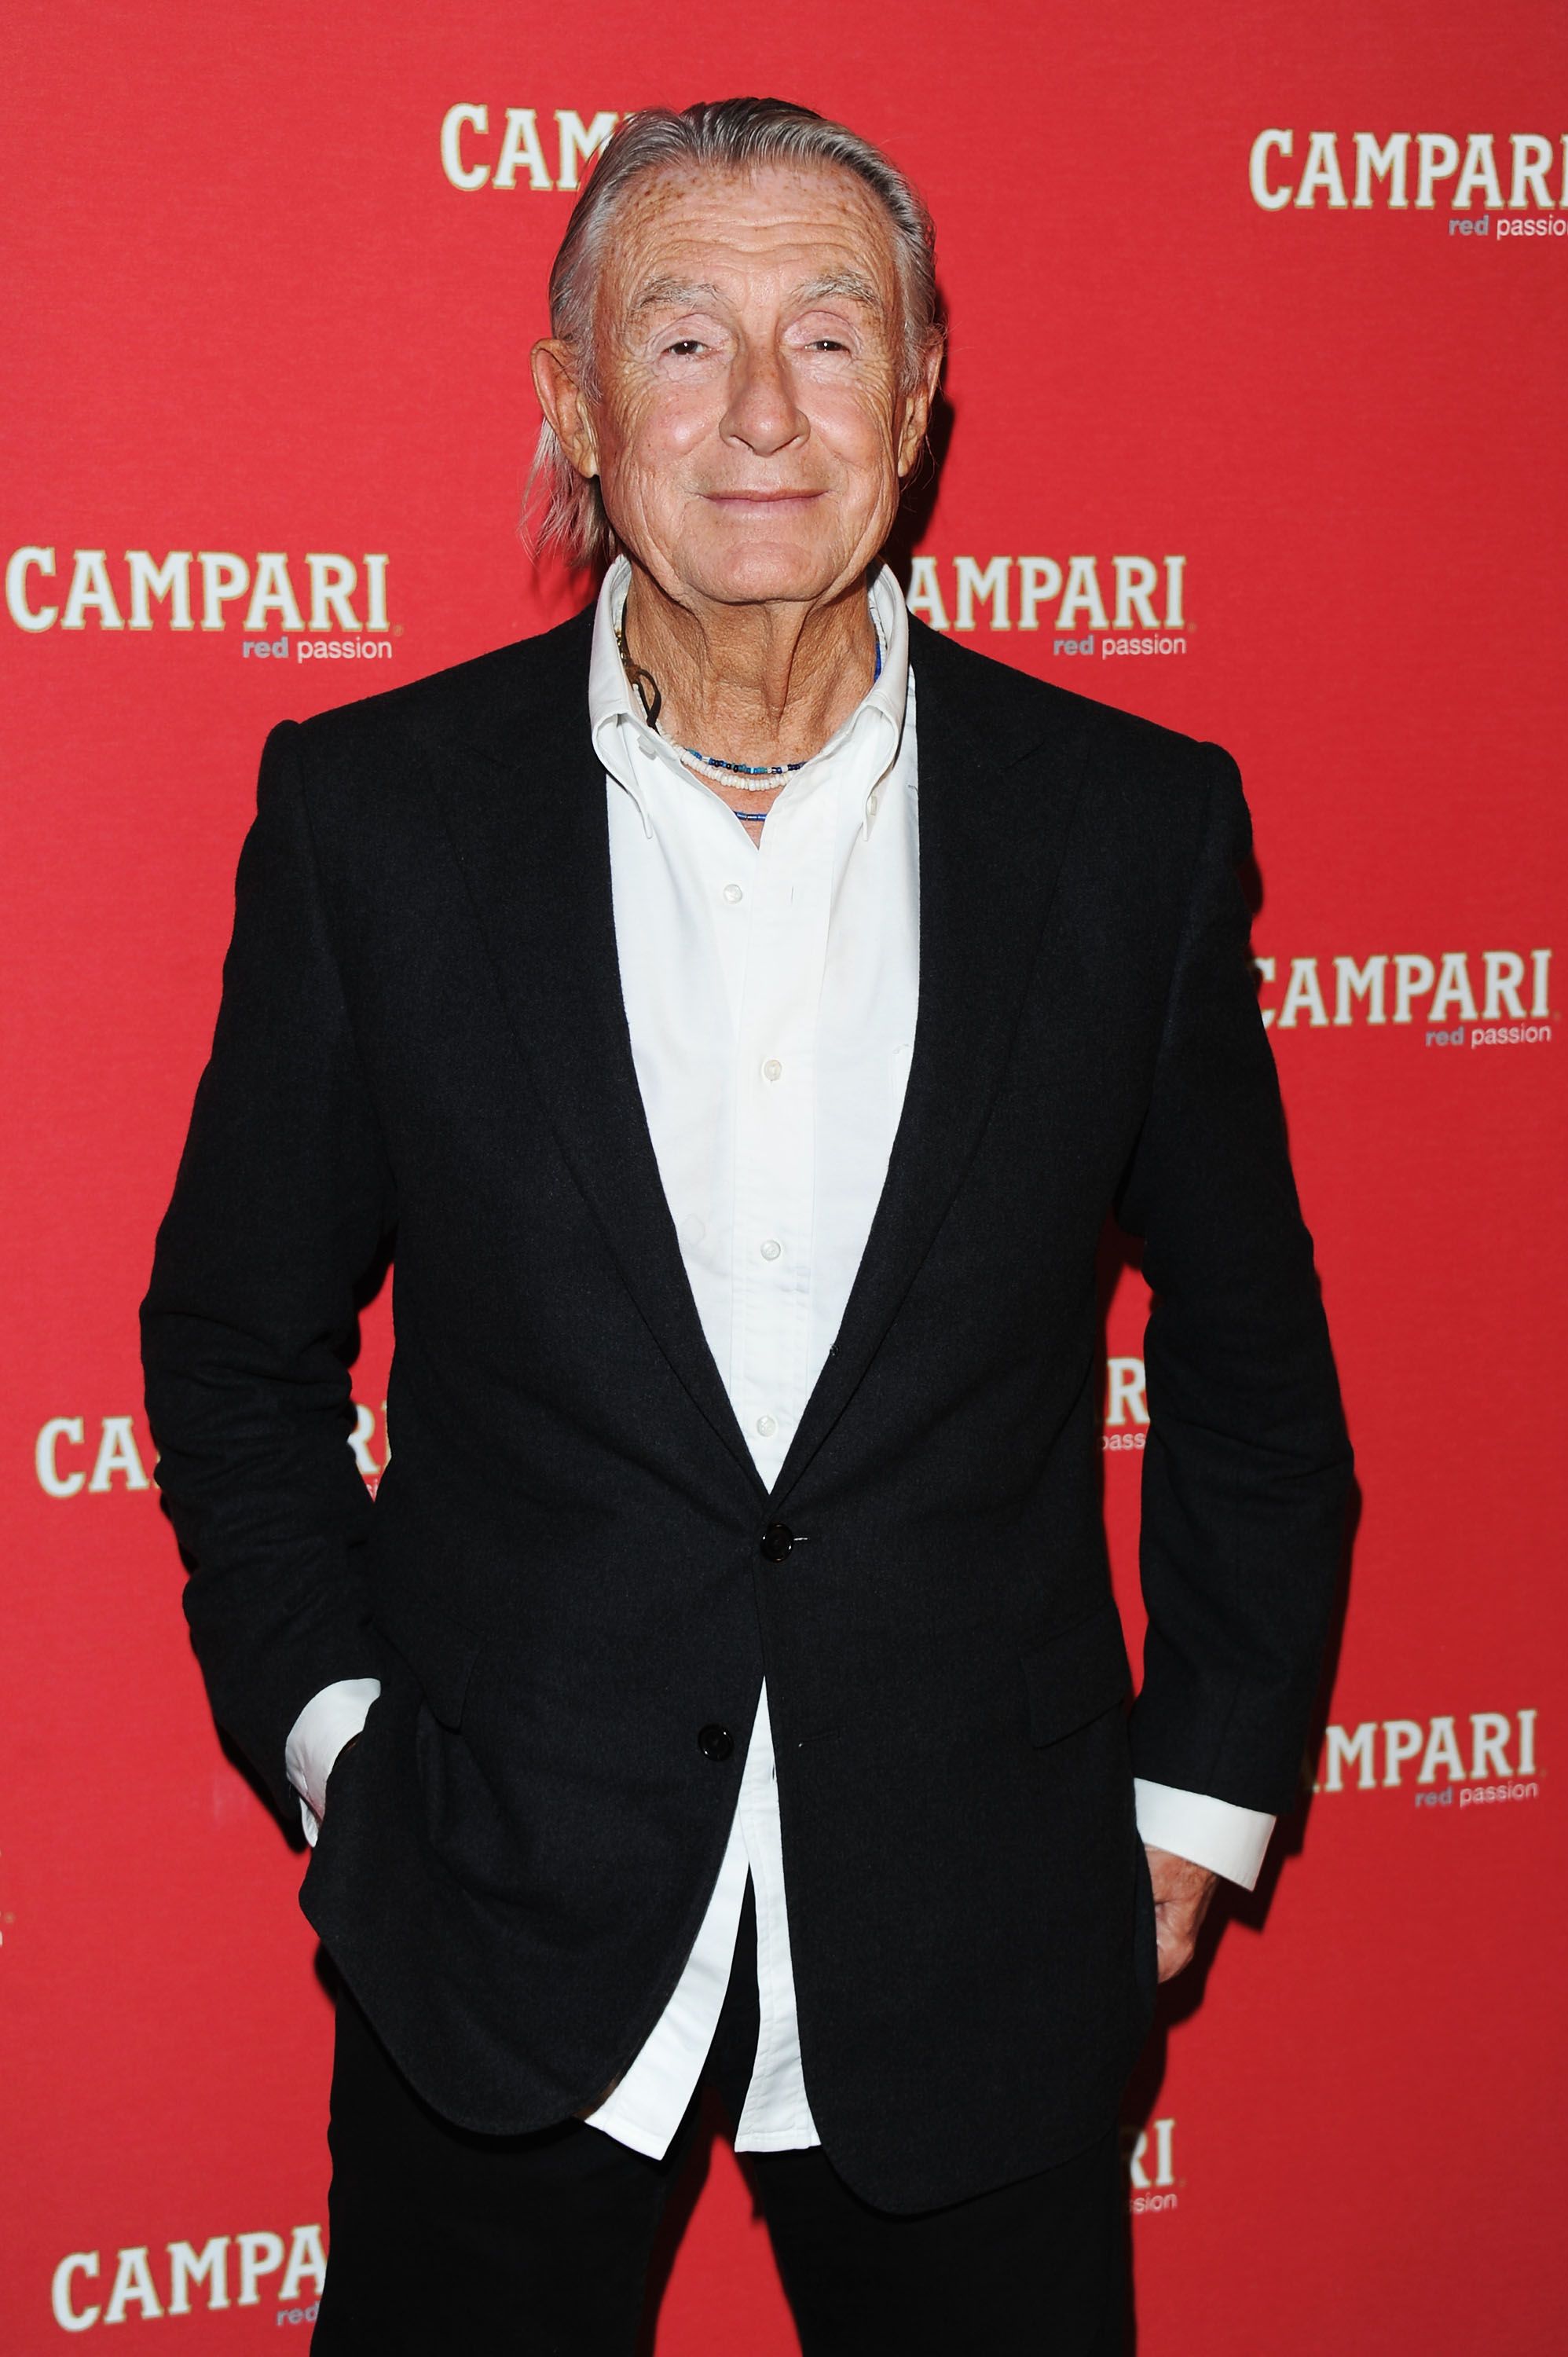 Joel Schumacher at a Campari event during the 6th International Rome Film Festival at Auditorium Parco Della Musica on November 3, 2011 in Rome, Italy | Photo: Getty Images 